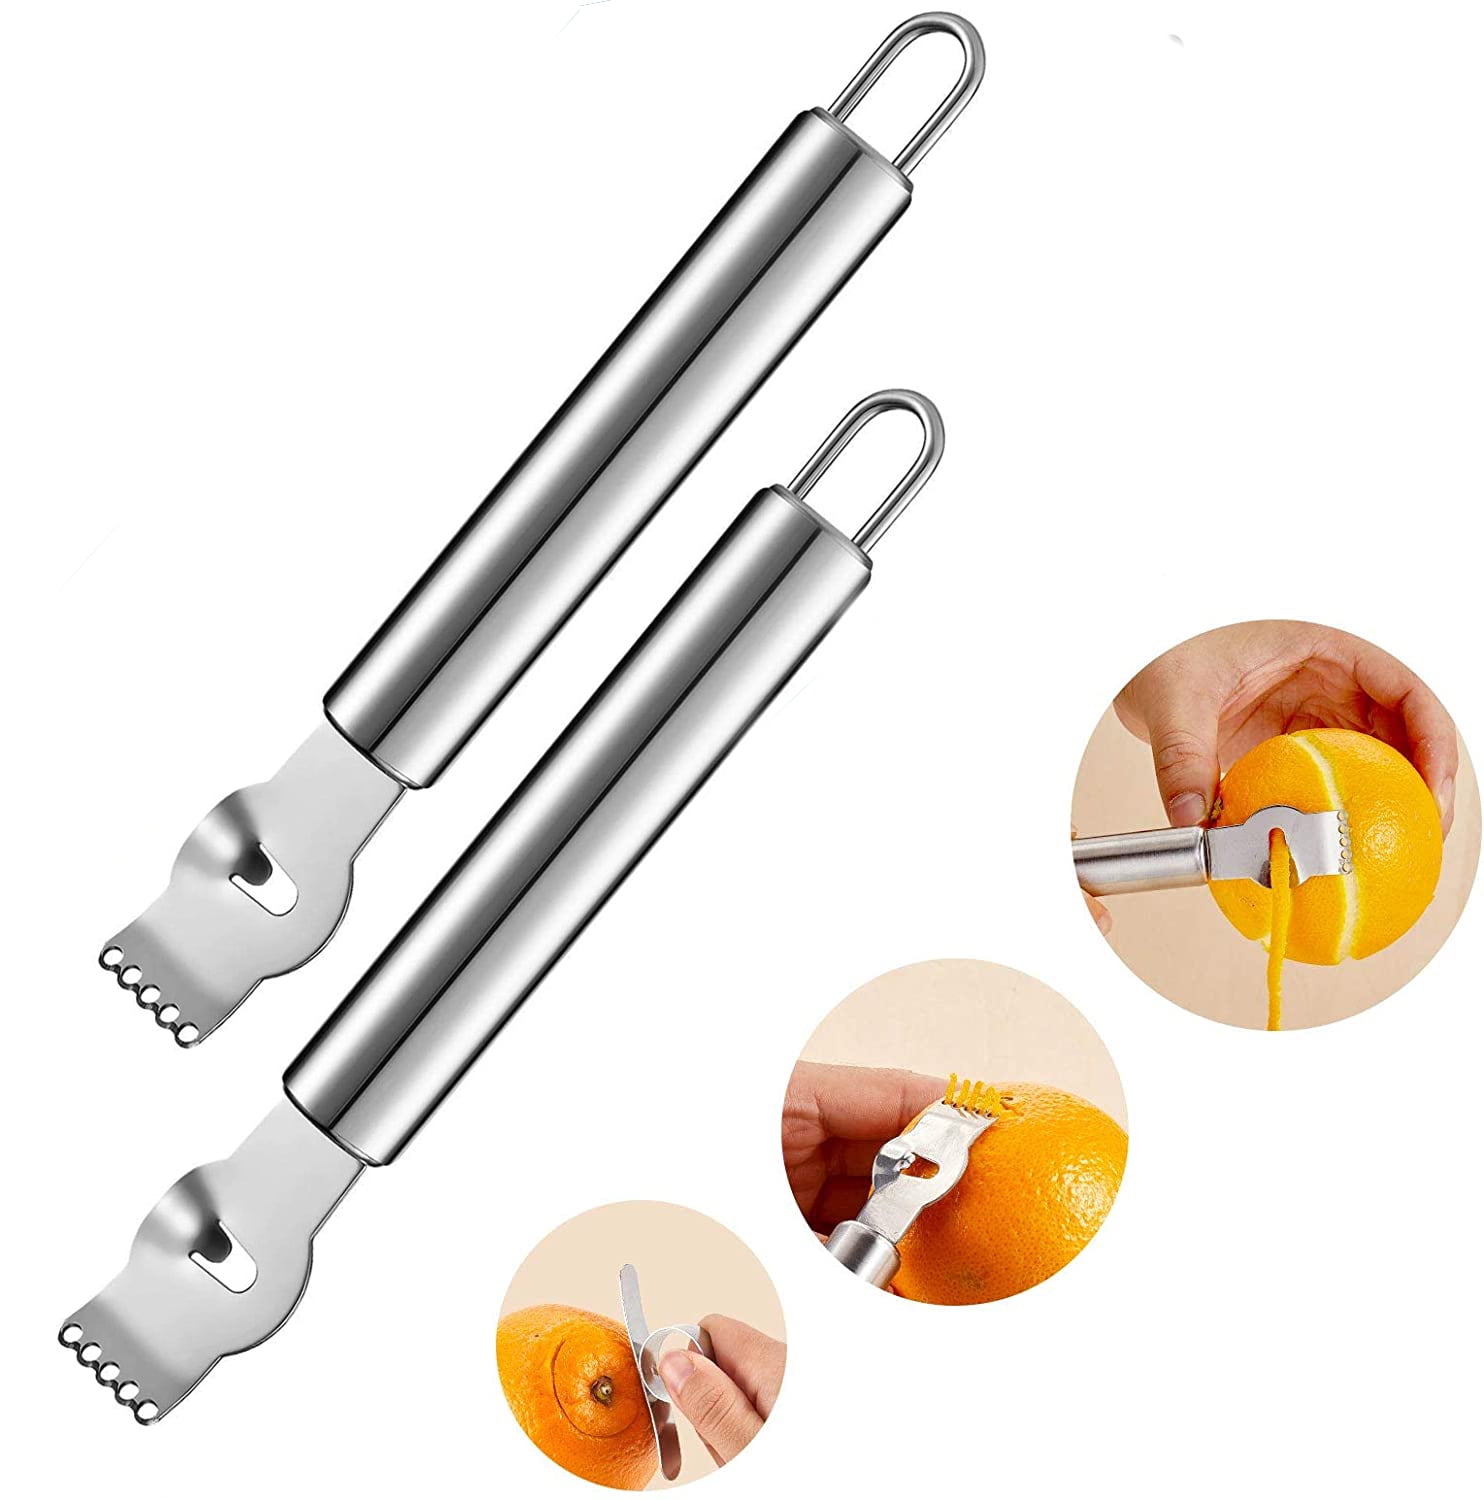 Citrus Peeler Cross Sell in Produce – Fixtures Close Up